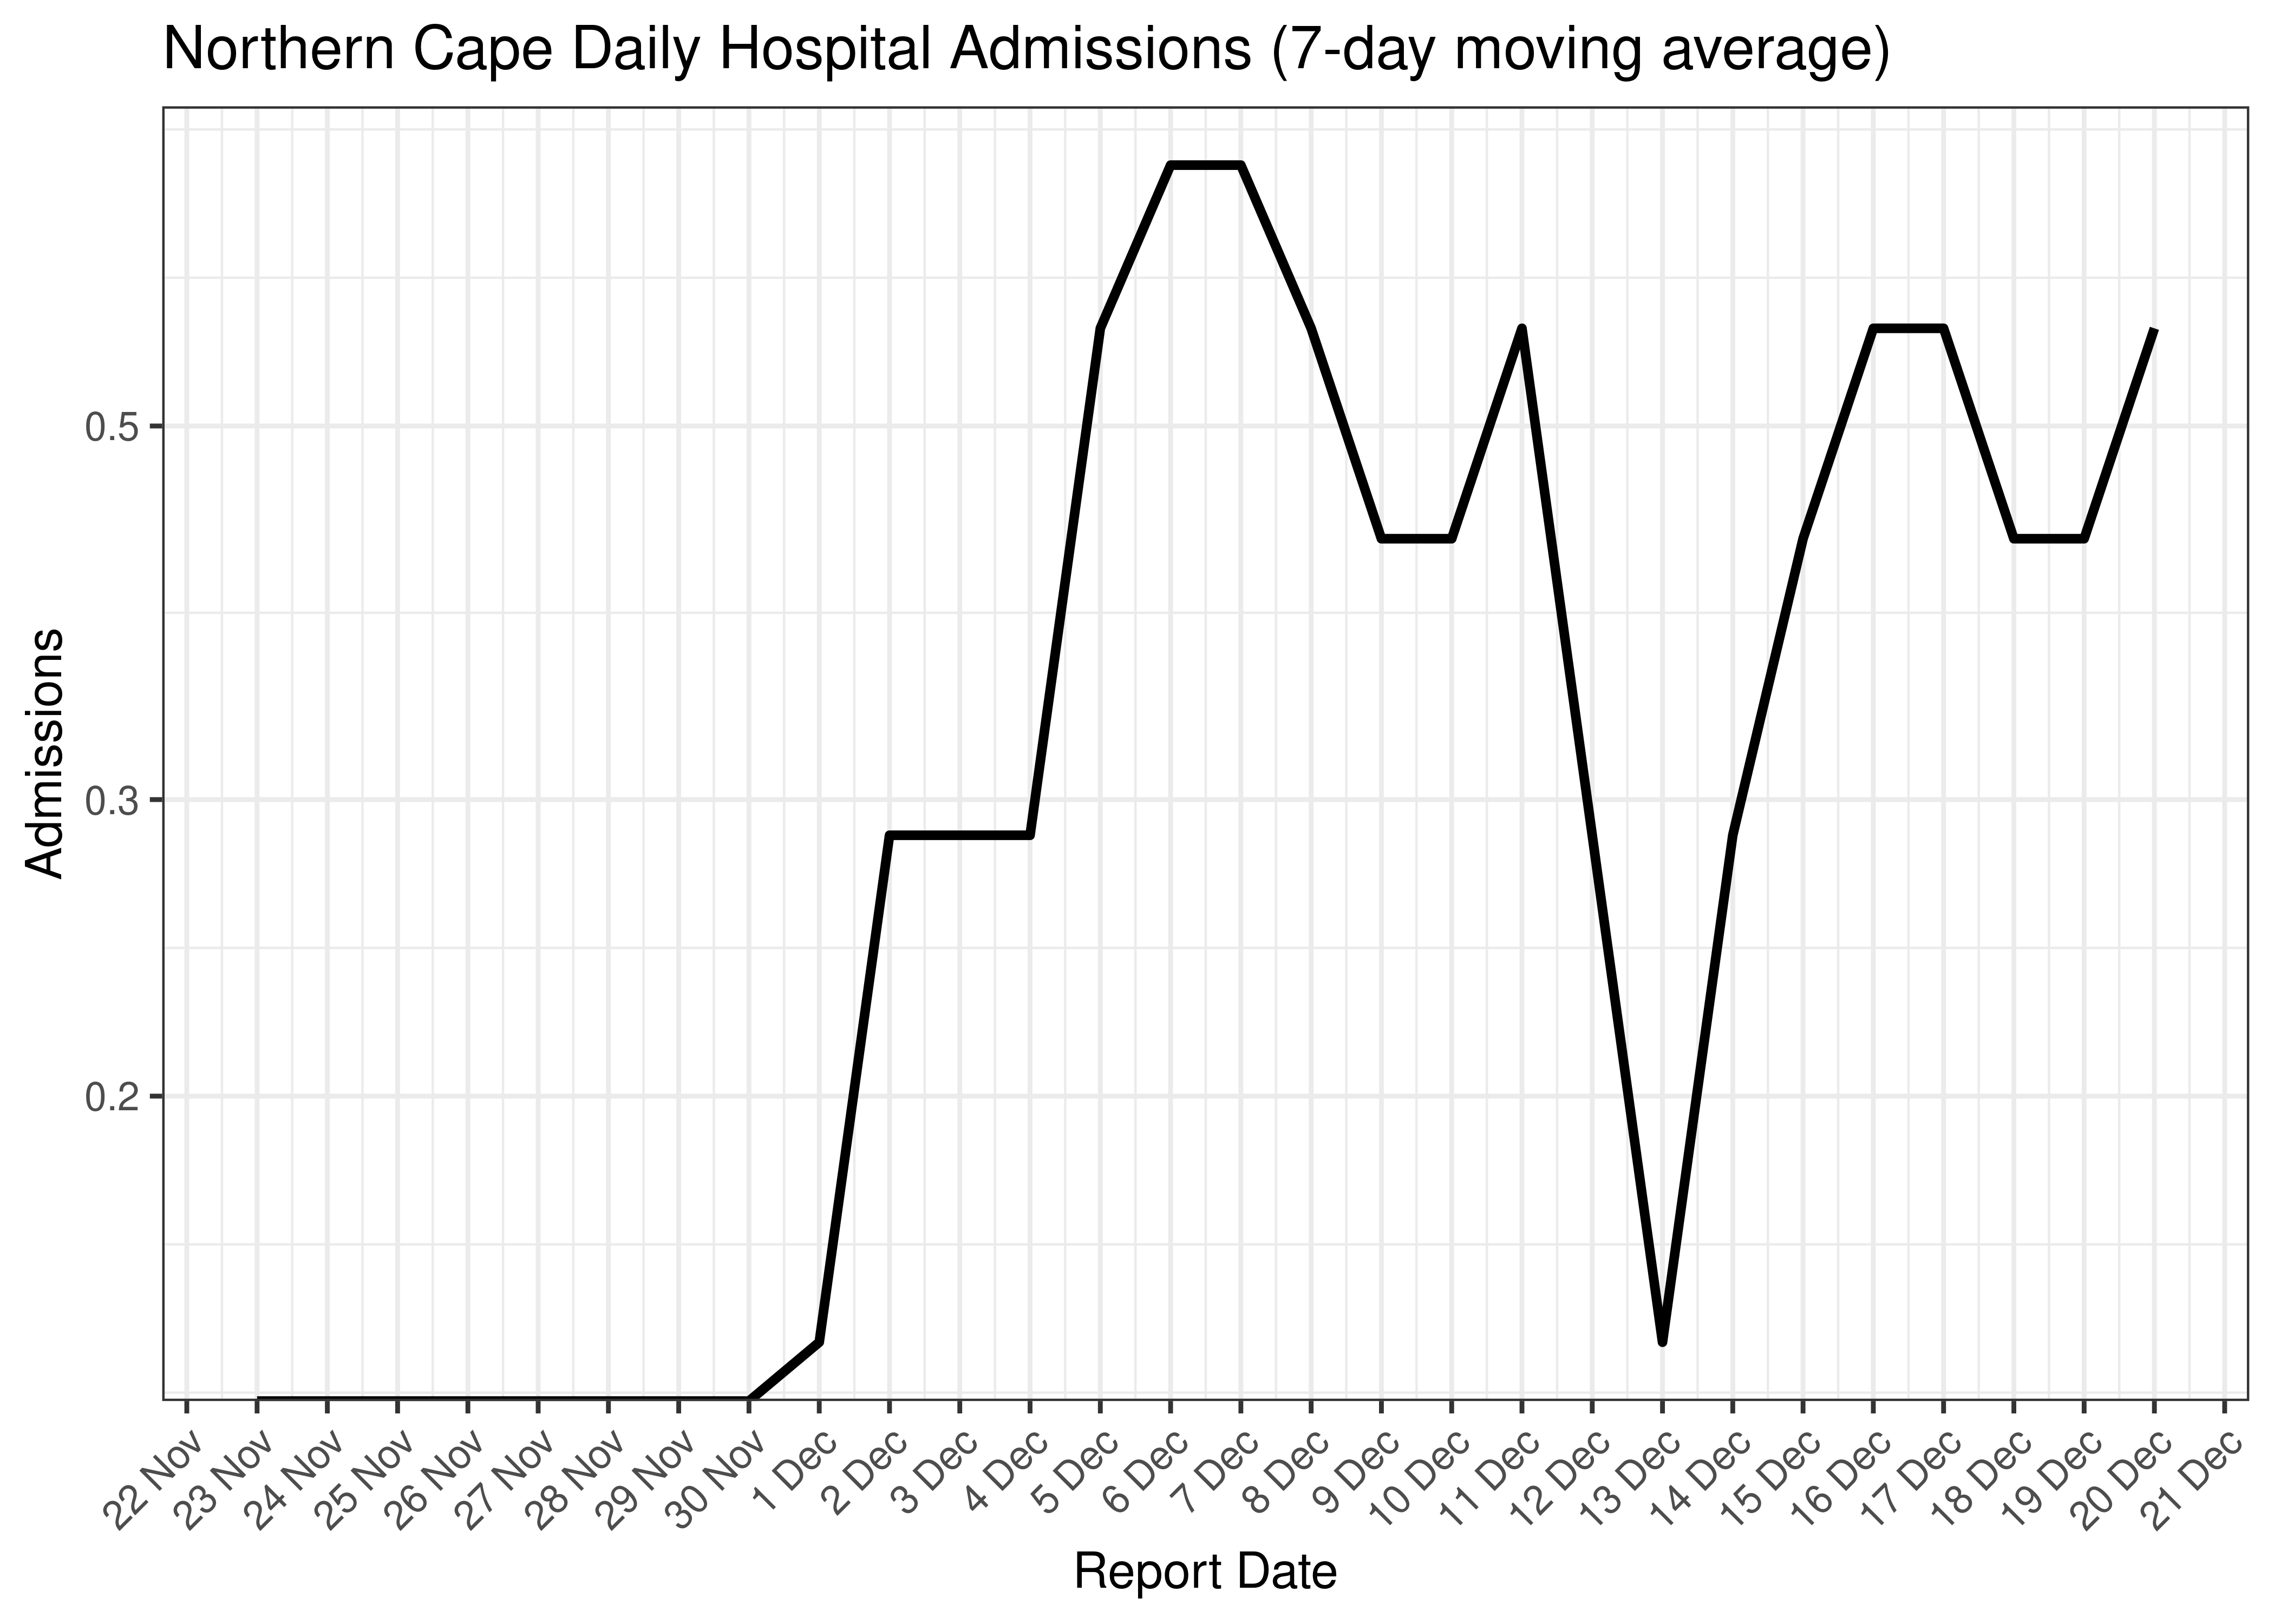 Northern Cape Daily Hospital Admissions for Last 30-days (7-day moving average)